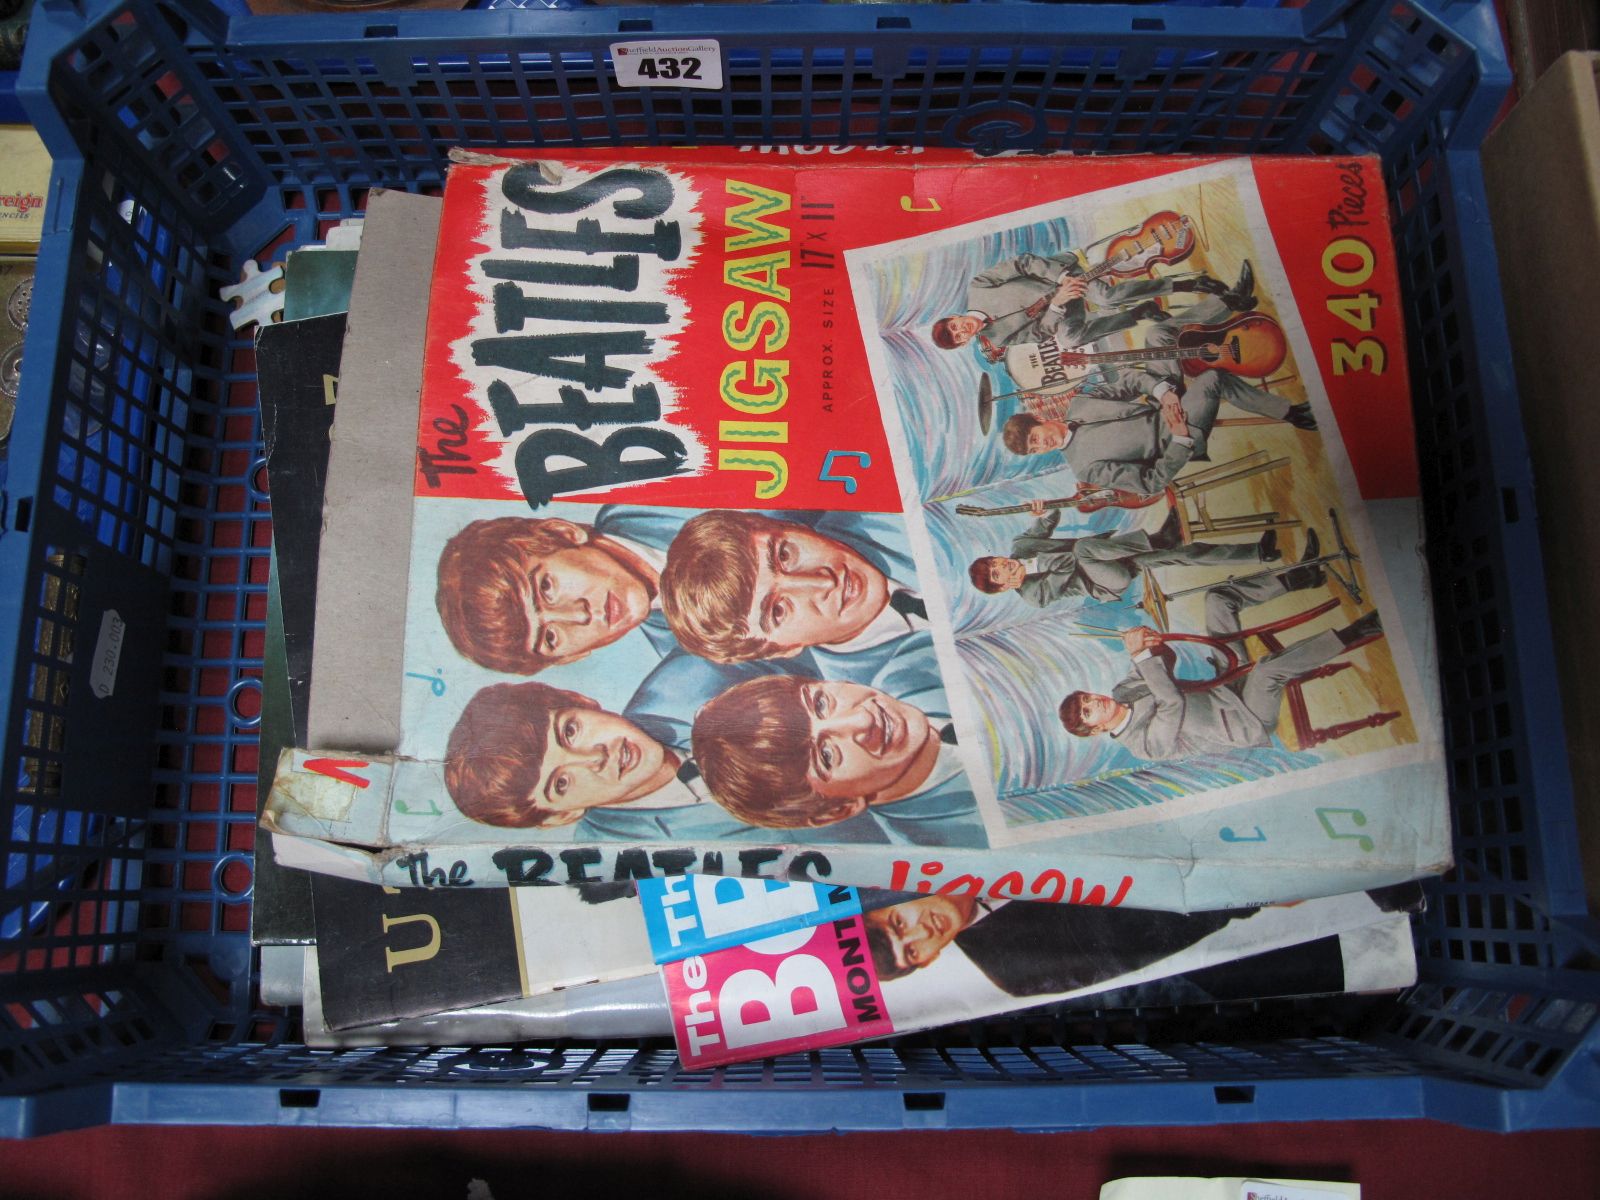 An Original 1960's "Beatles" Jigsaw, (unchecked/boxed), plus later Beatles fanzines and other rock